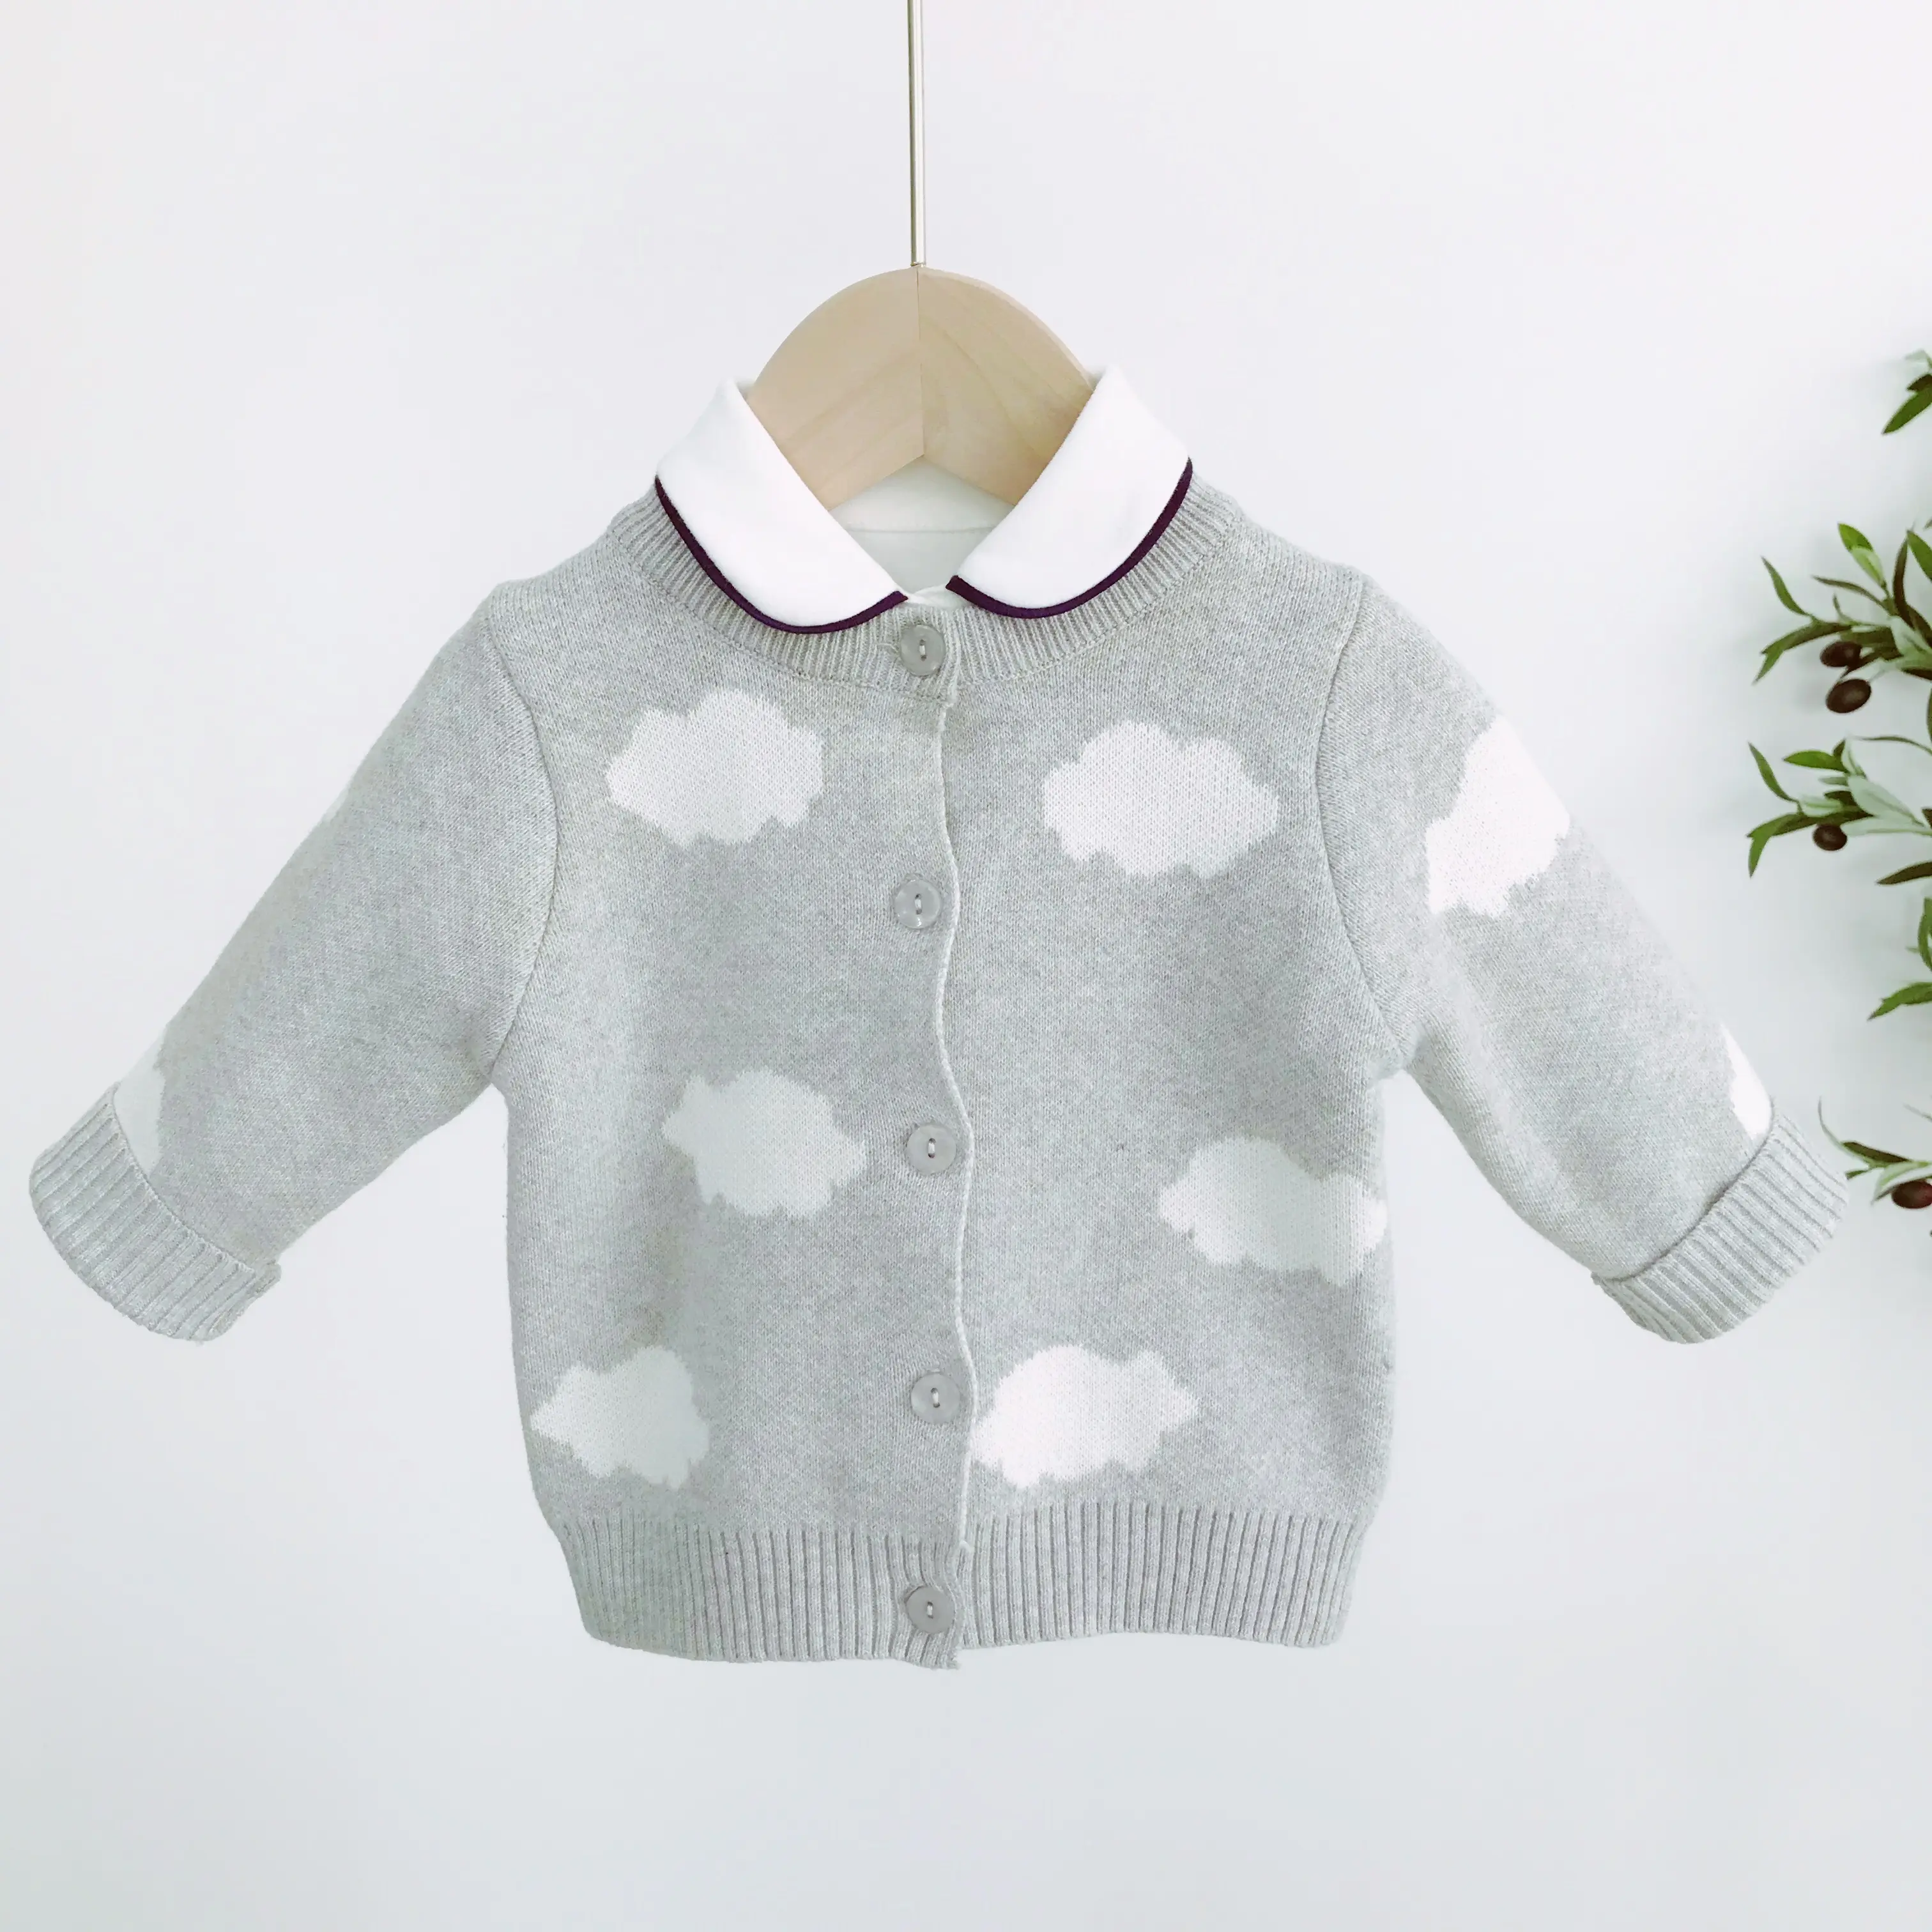 High quality baby boy grey knitted sweater 100% cotton baby cardigan